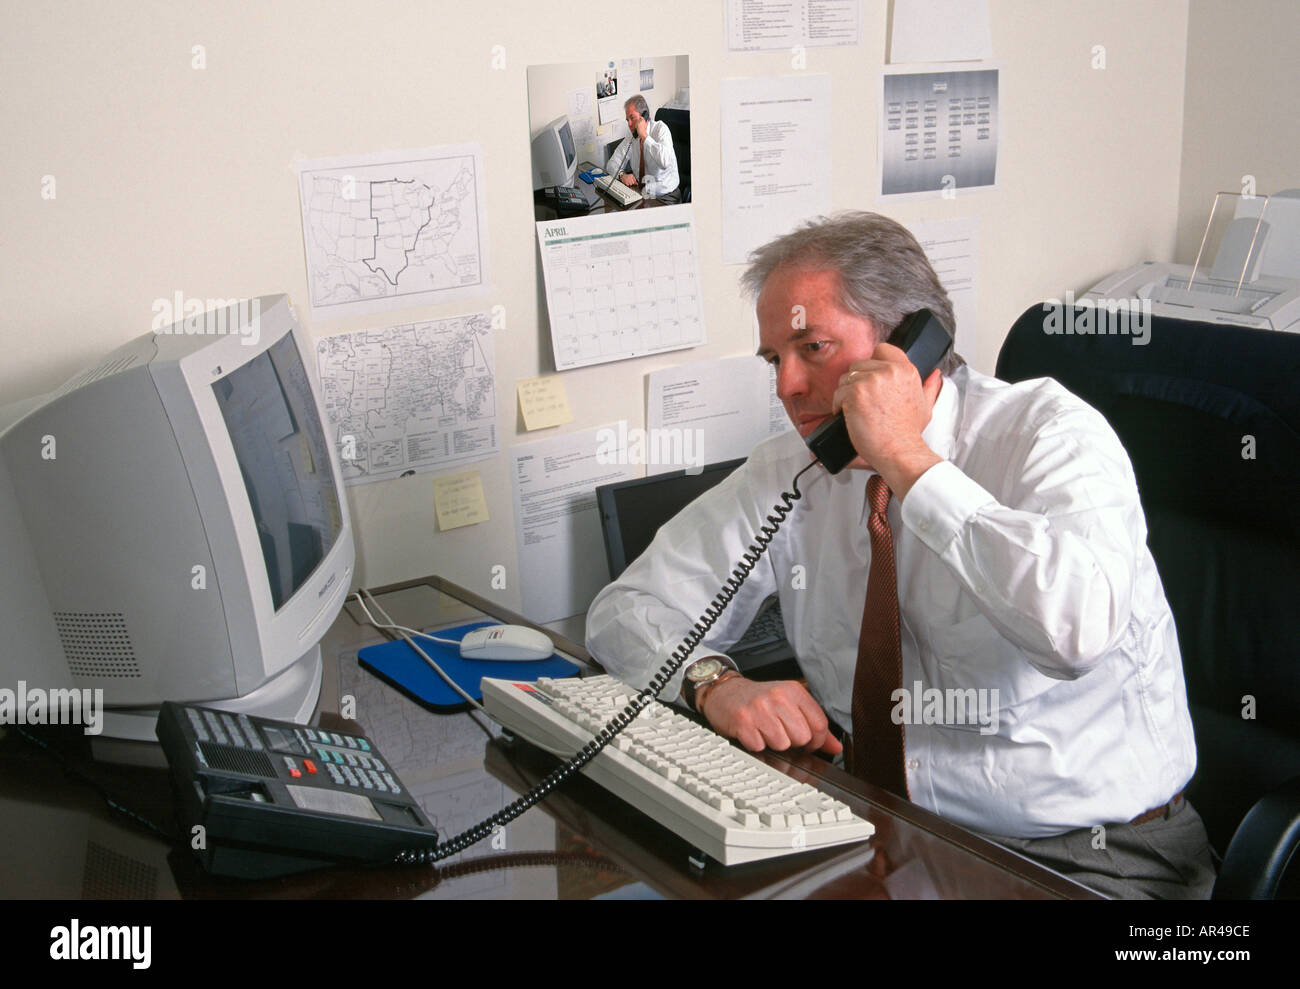 Middle aged white male executive sitting at desk talking on telephone Calendar has same image convergent series Stock Photo